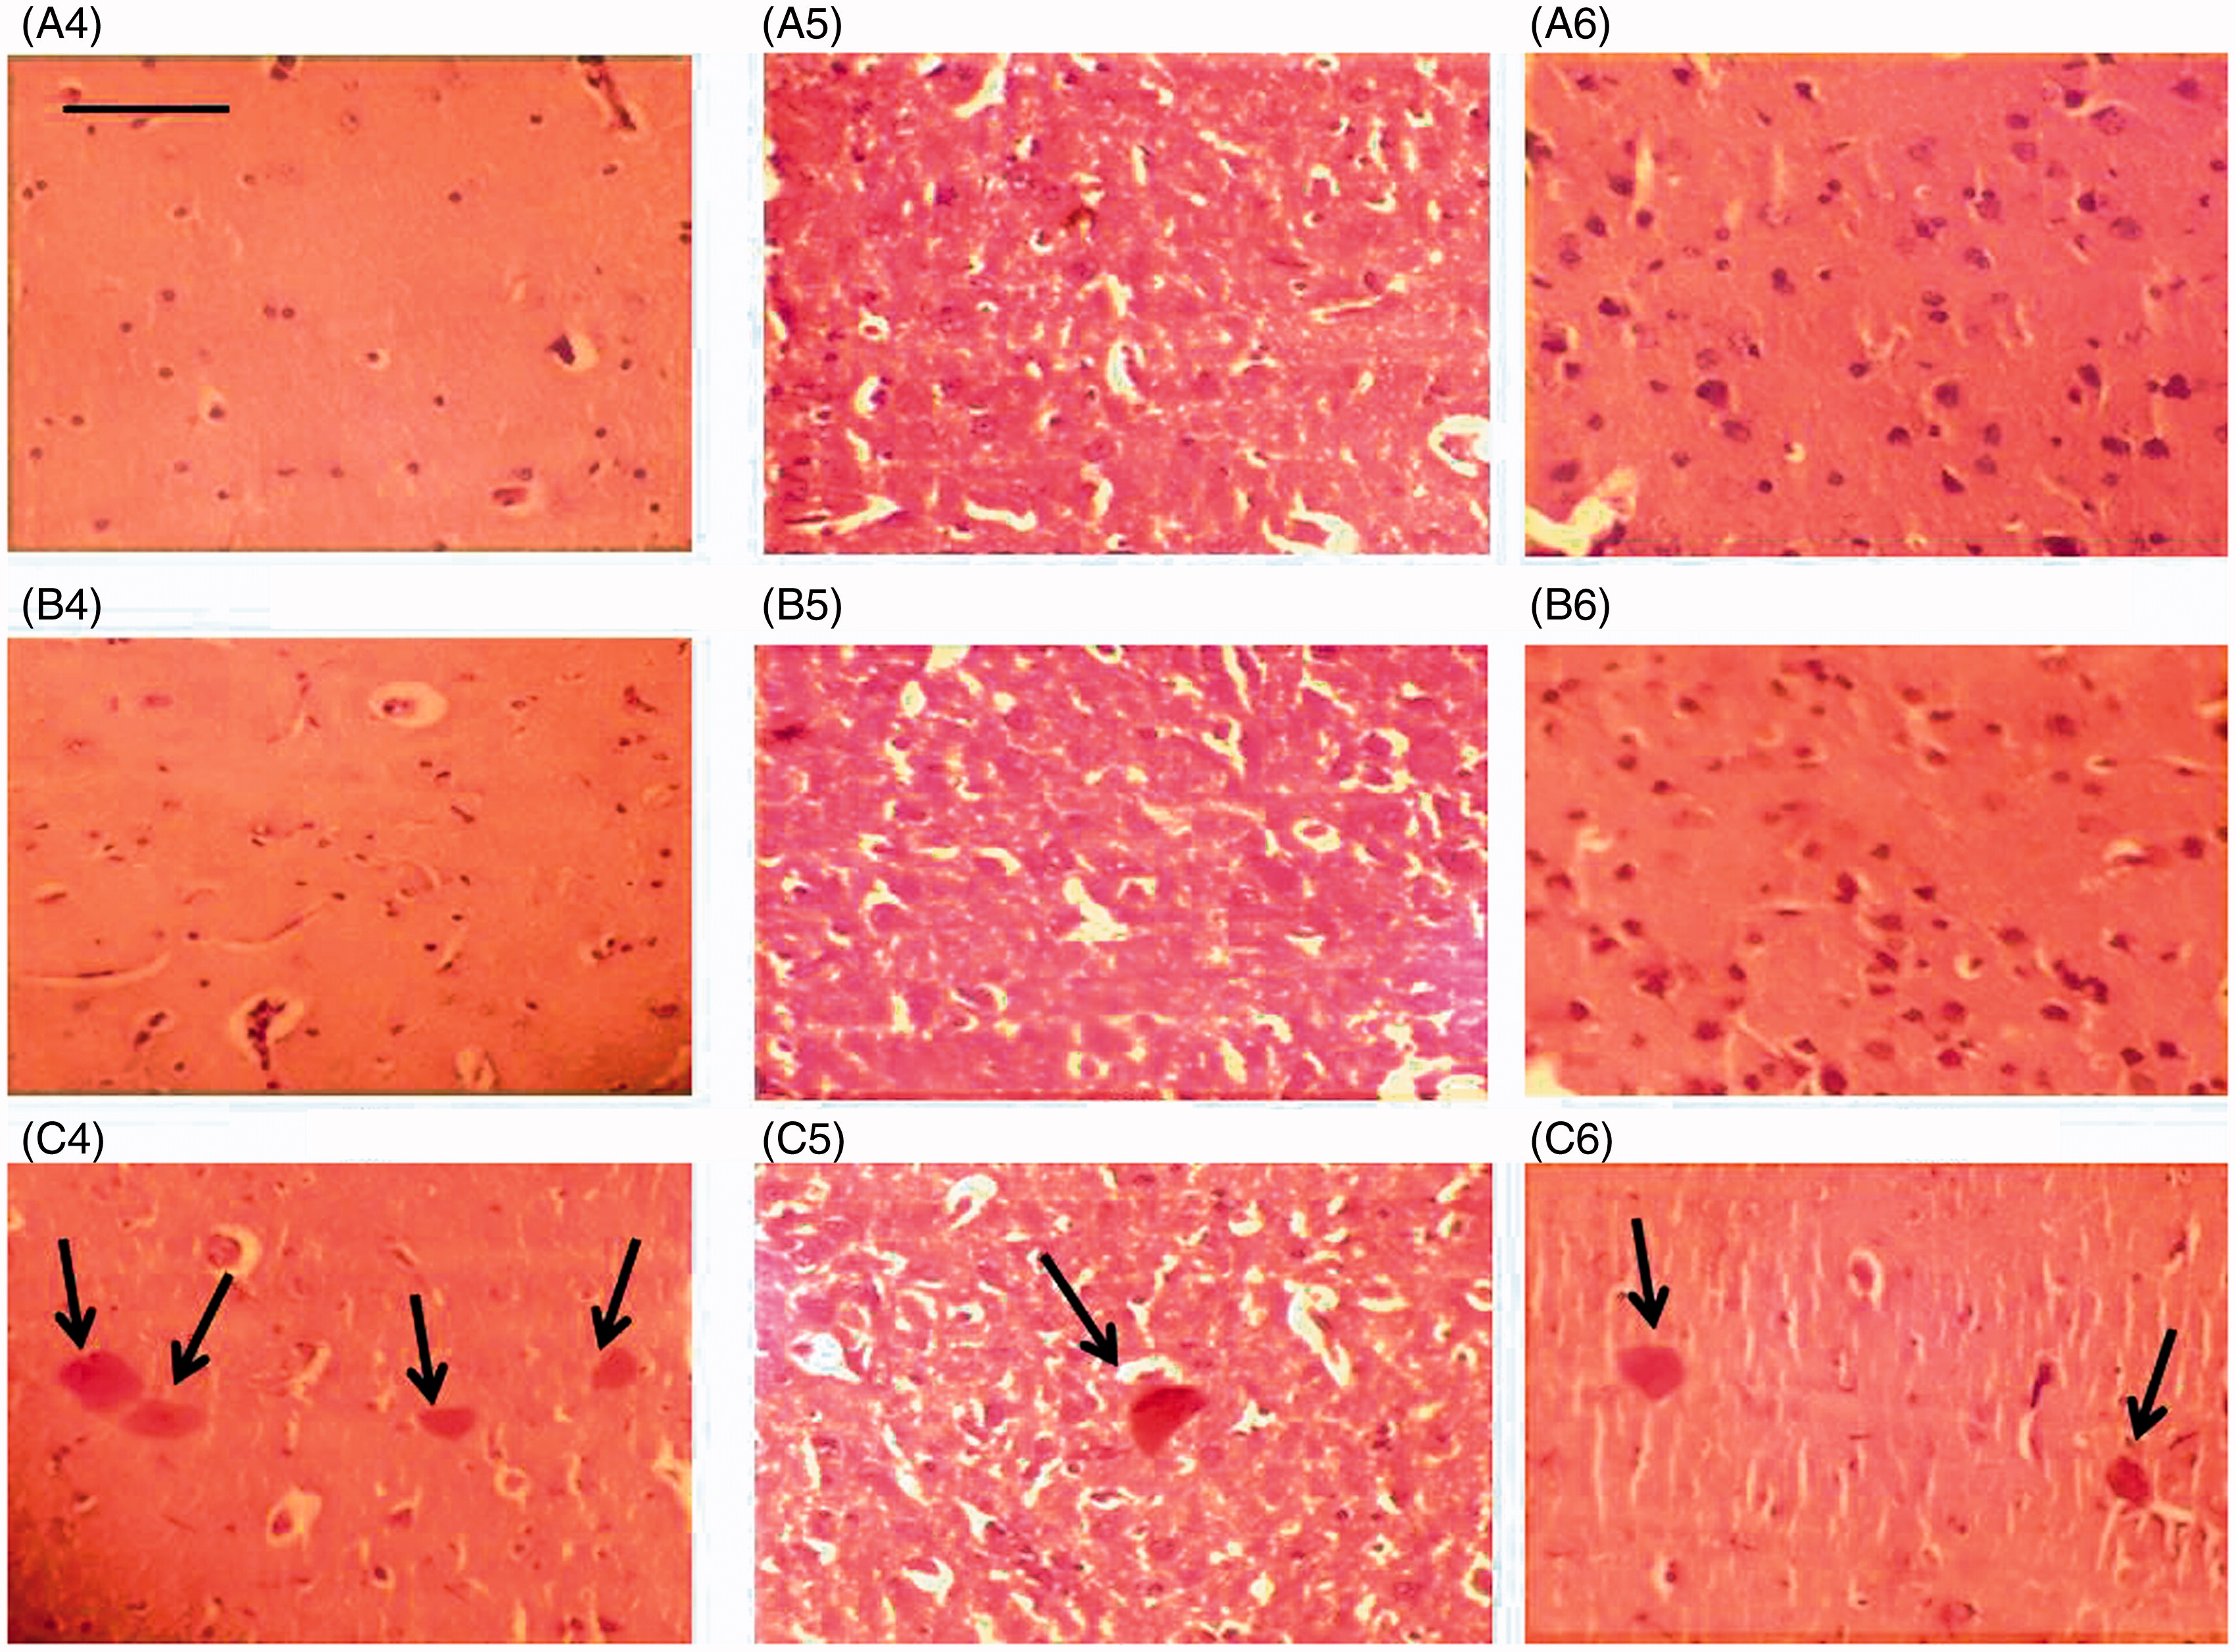 Figure 5. Staining (Congo red) of plaques in different brain areas in rats. Representative micrographs are shown. Control rats: (A) (top row); sham-operated rats: (B) (middle row); icv colchicine injected rats: (C) (last row). Hippocampus: 4 (left column), corpus striatum: 5 (middle column), amygdala: 6 (right column). Letter and number indicate group and specific brain region (e.g. A4: Hippocampus, control rat). Magnification: 400×, length of bar = 16.18 μm. Arrows indicate plaques.